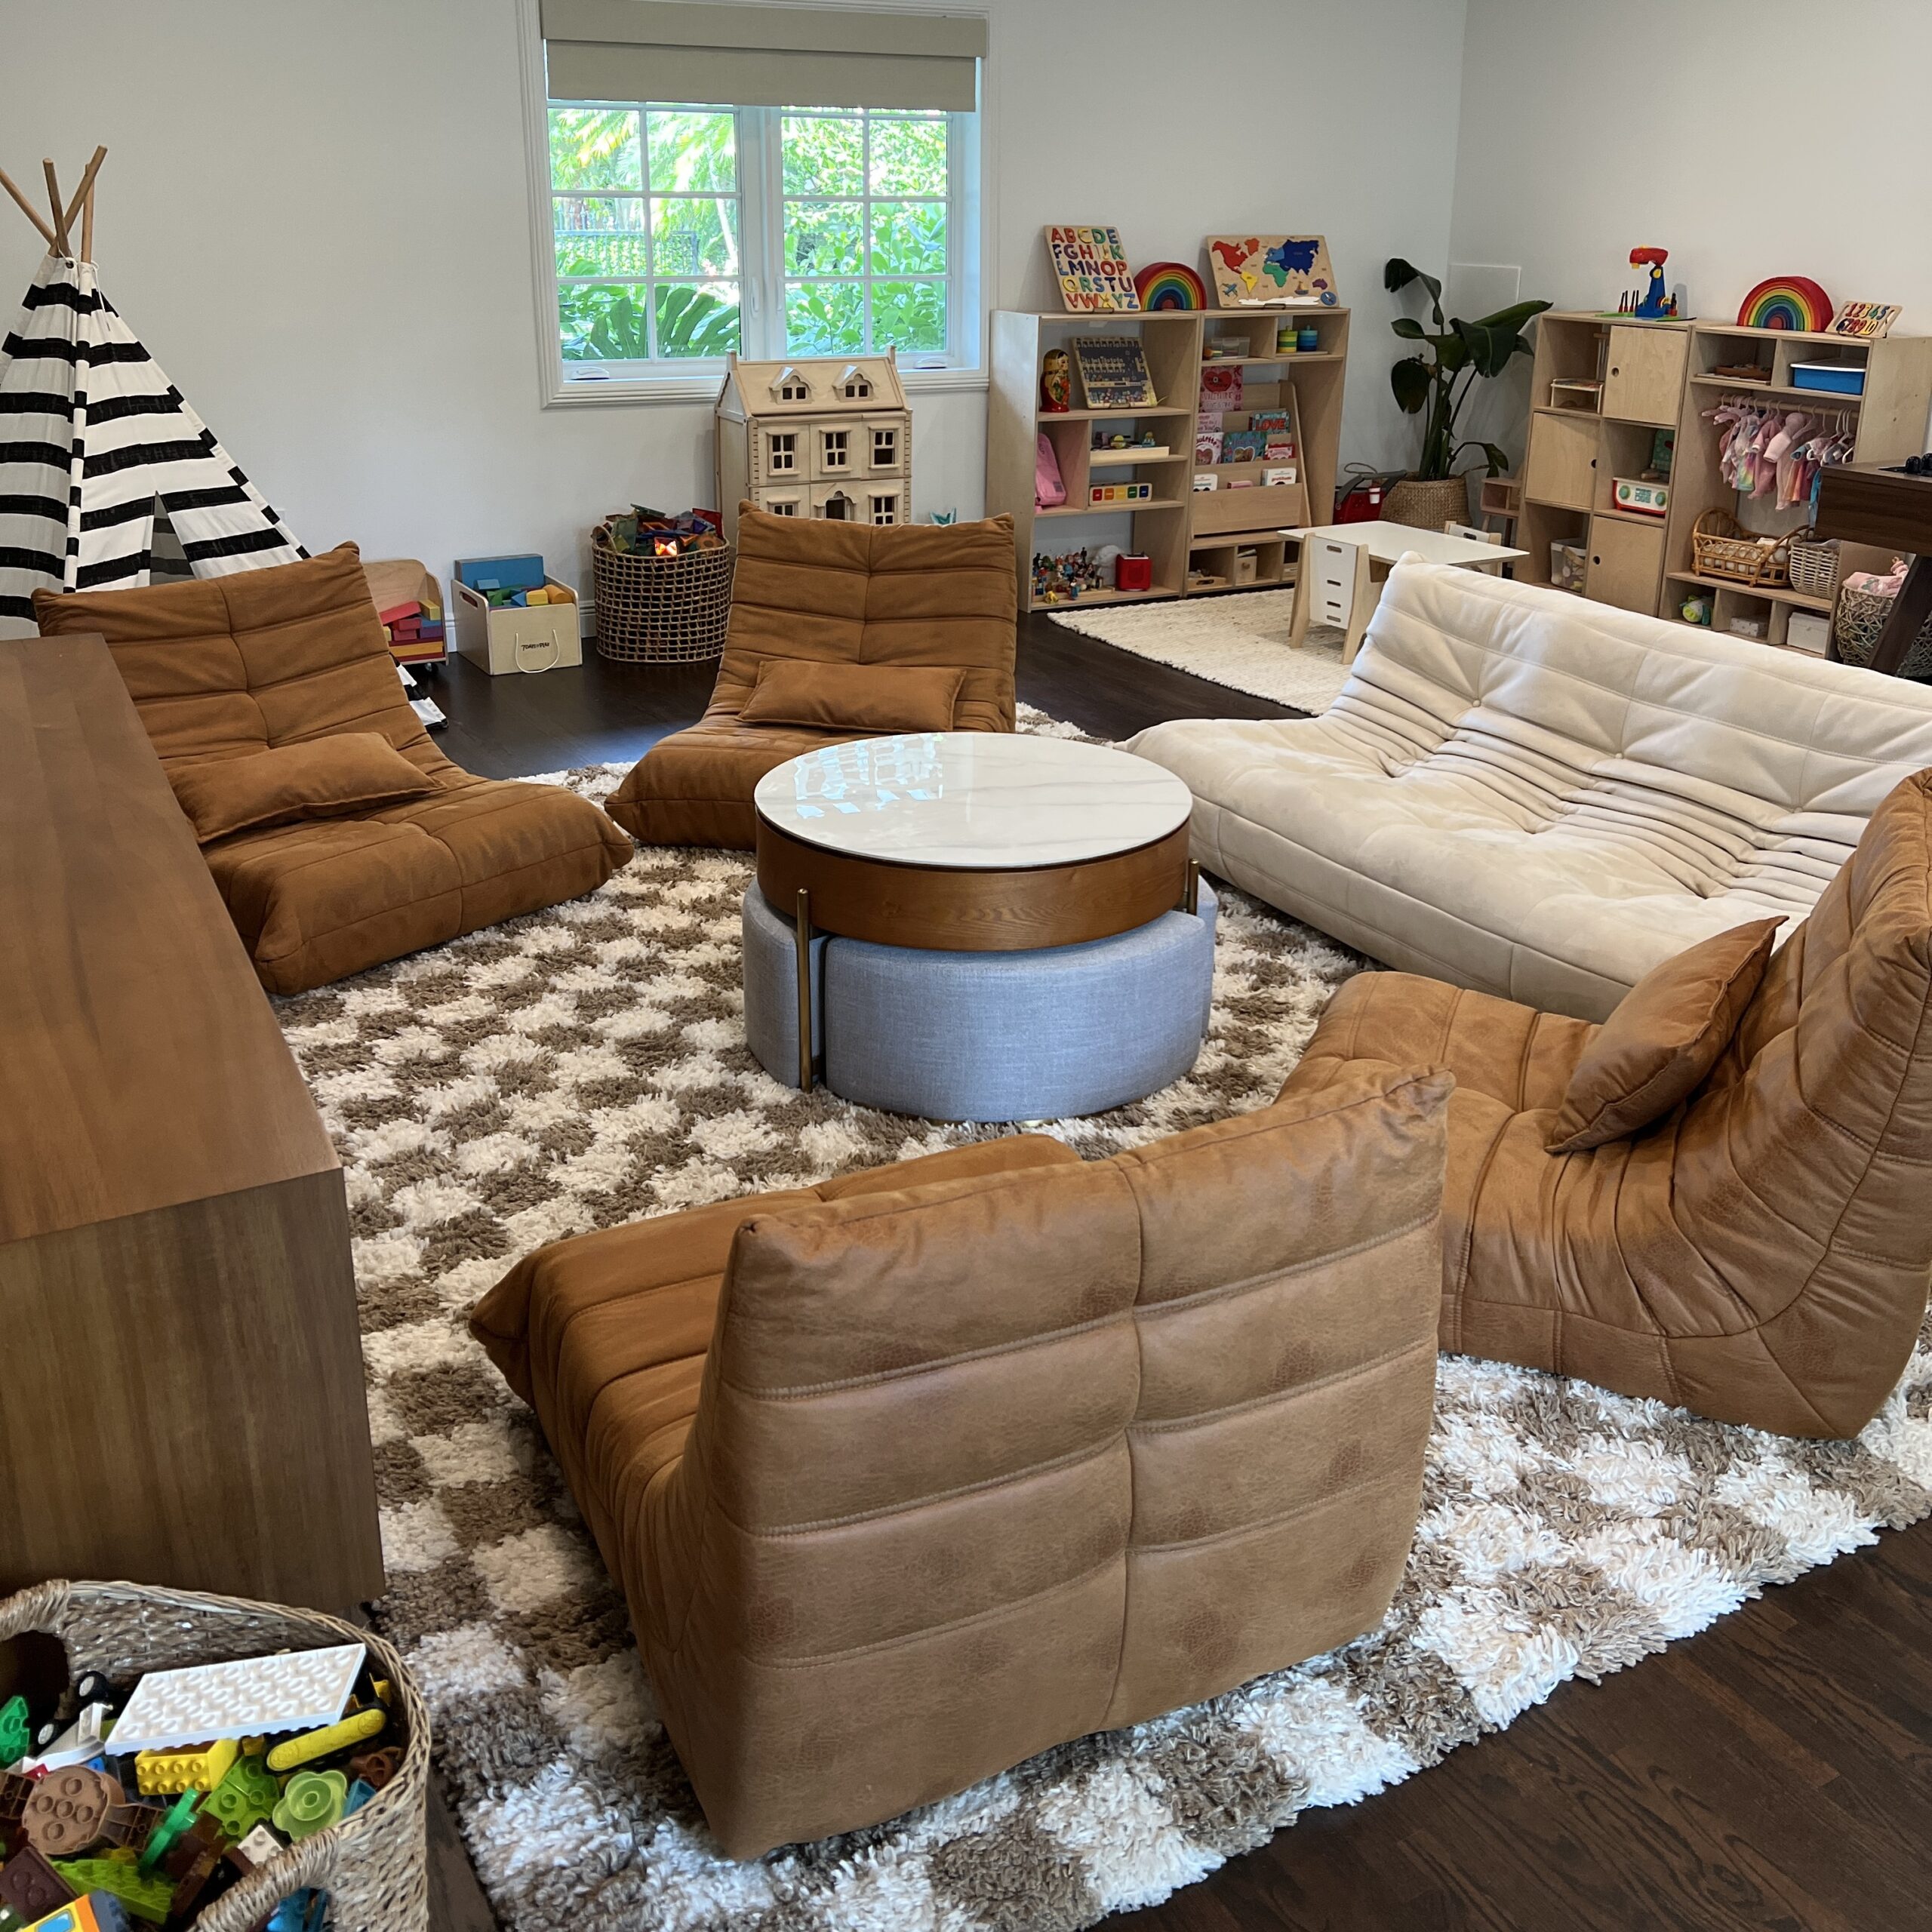 Playroom Inspiration – An Exciting Space for All Ages